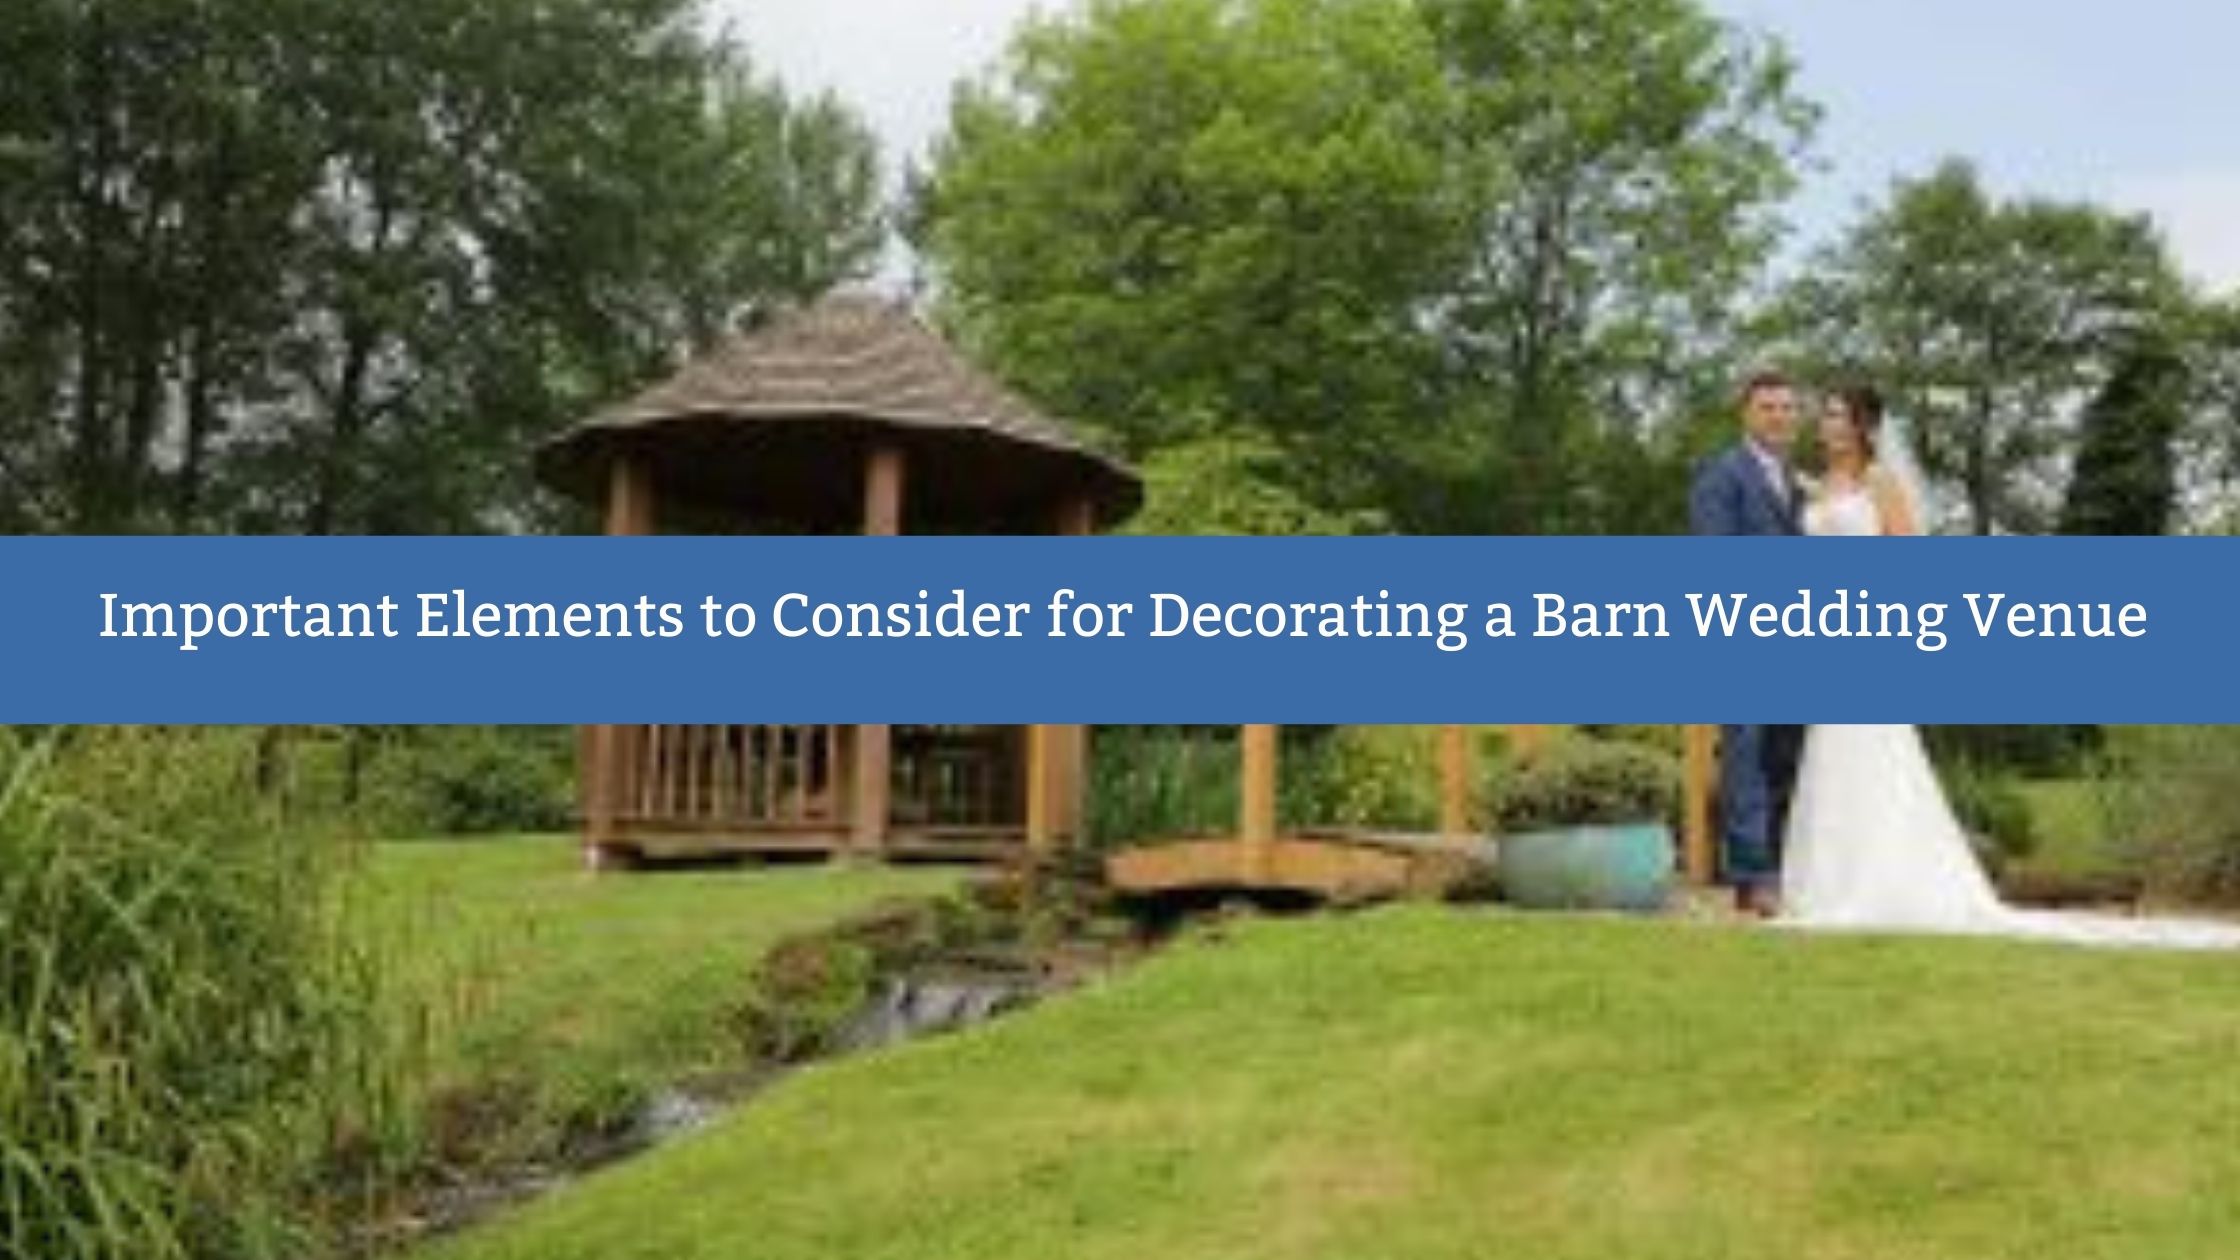 Important Elements to Consider for Decorating a Barn Wedding Venue